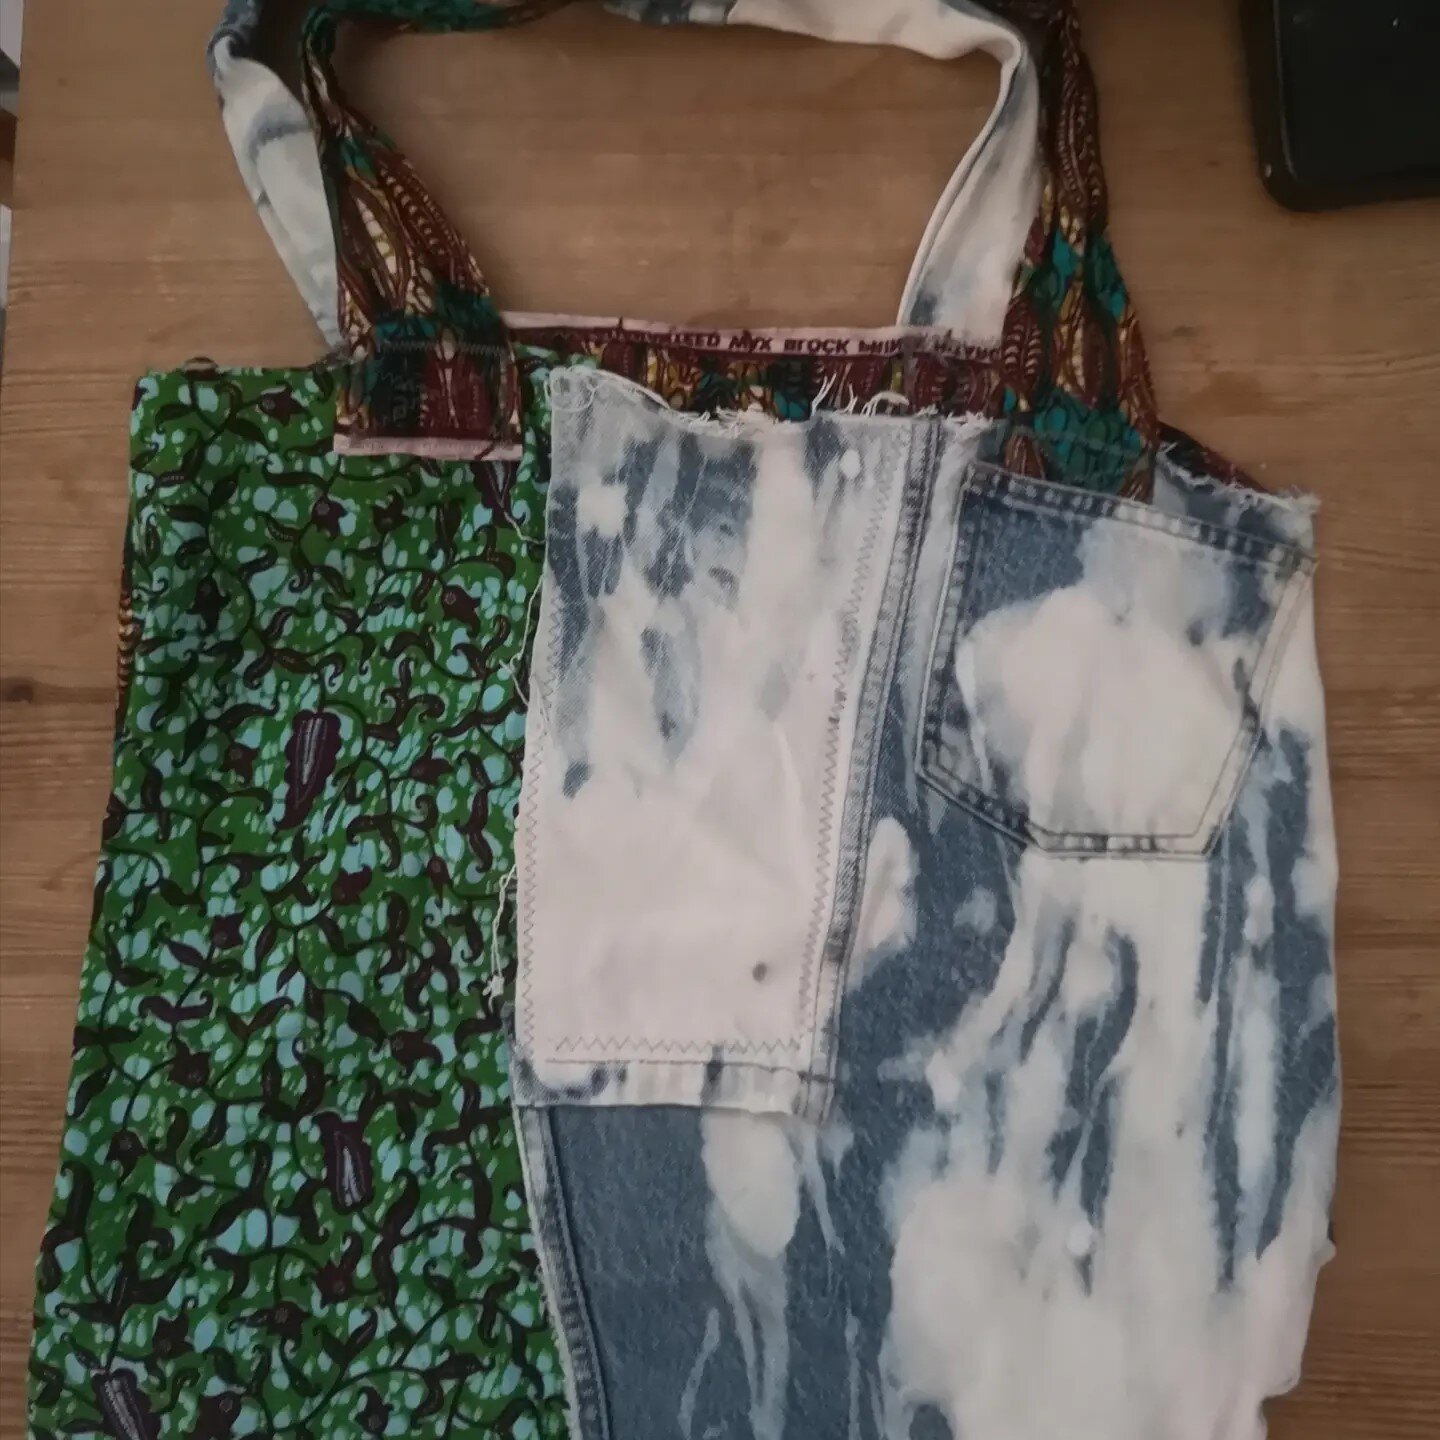 Upcycled African Pepper Print ( jollof style) Cocoa, Cacao, Pod Print ( yummy) and hand dyed denim! Ehhh Challe ! Shake dat Booty...from Toille sample to finished Yoga and Fitness bag, tried and tested @in2wildfestival the @emethicaluxury denim throw